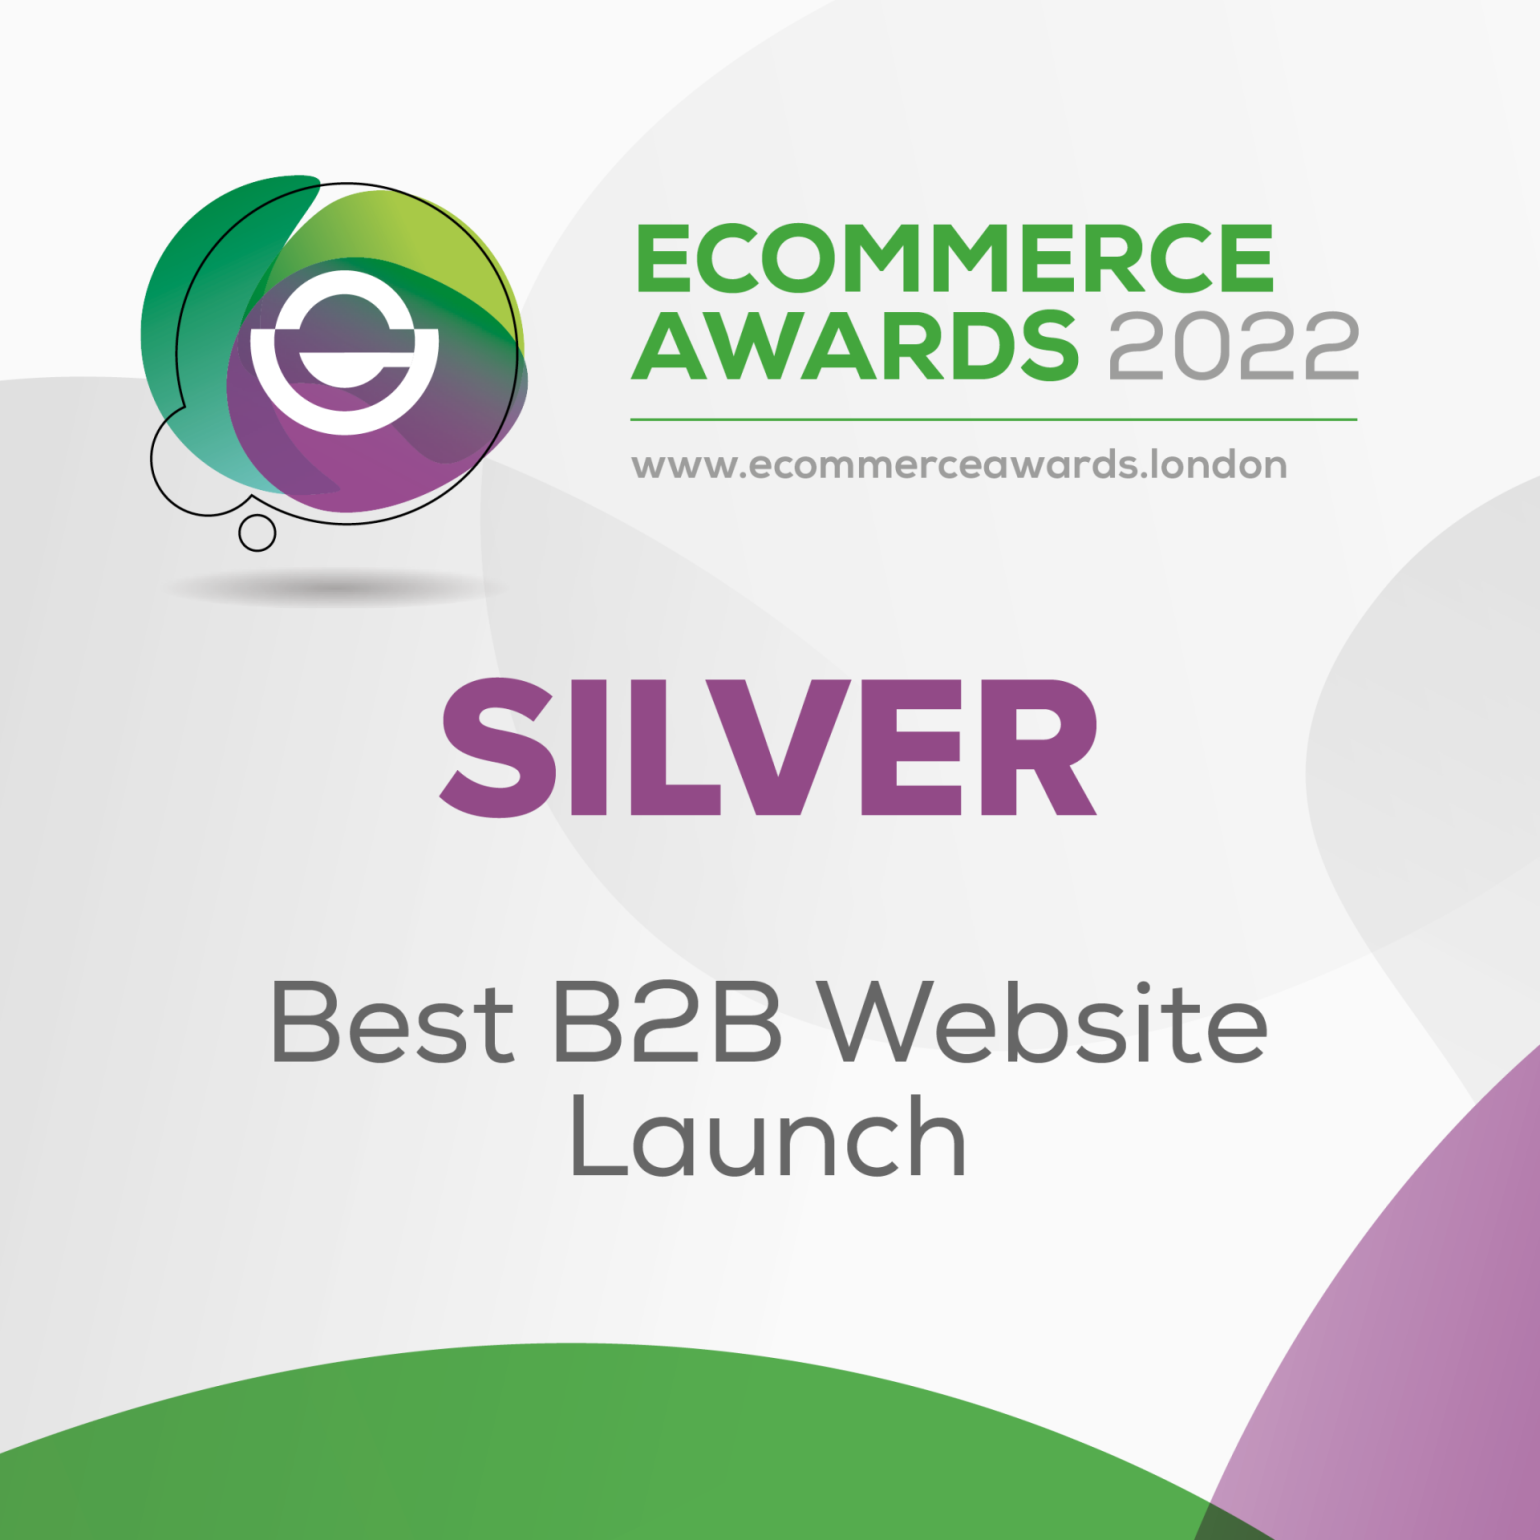  



 

We've collaborated with Kingspan on several eCommerce projects now, and we're proud to say that our most recent one has been nominated for an eCommerce award.

The Tanks Direct website has won a silver award for 'Best B2B Launch'.
